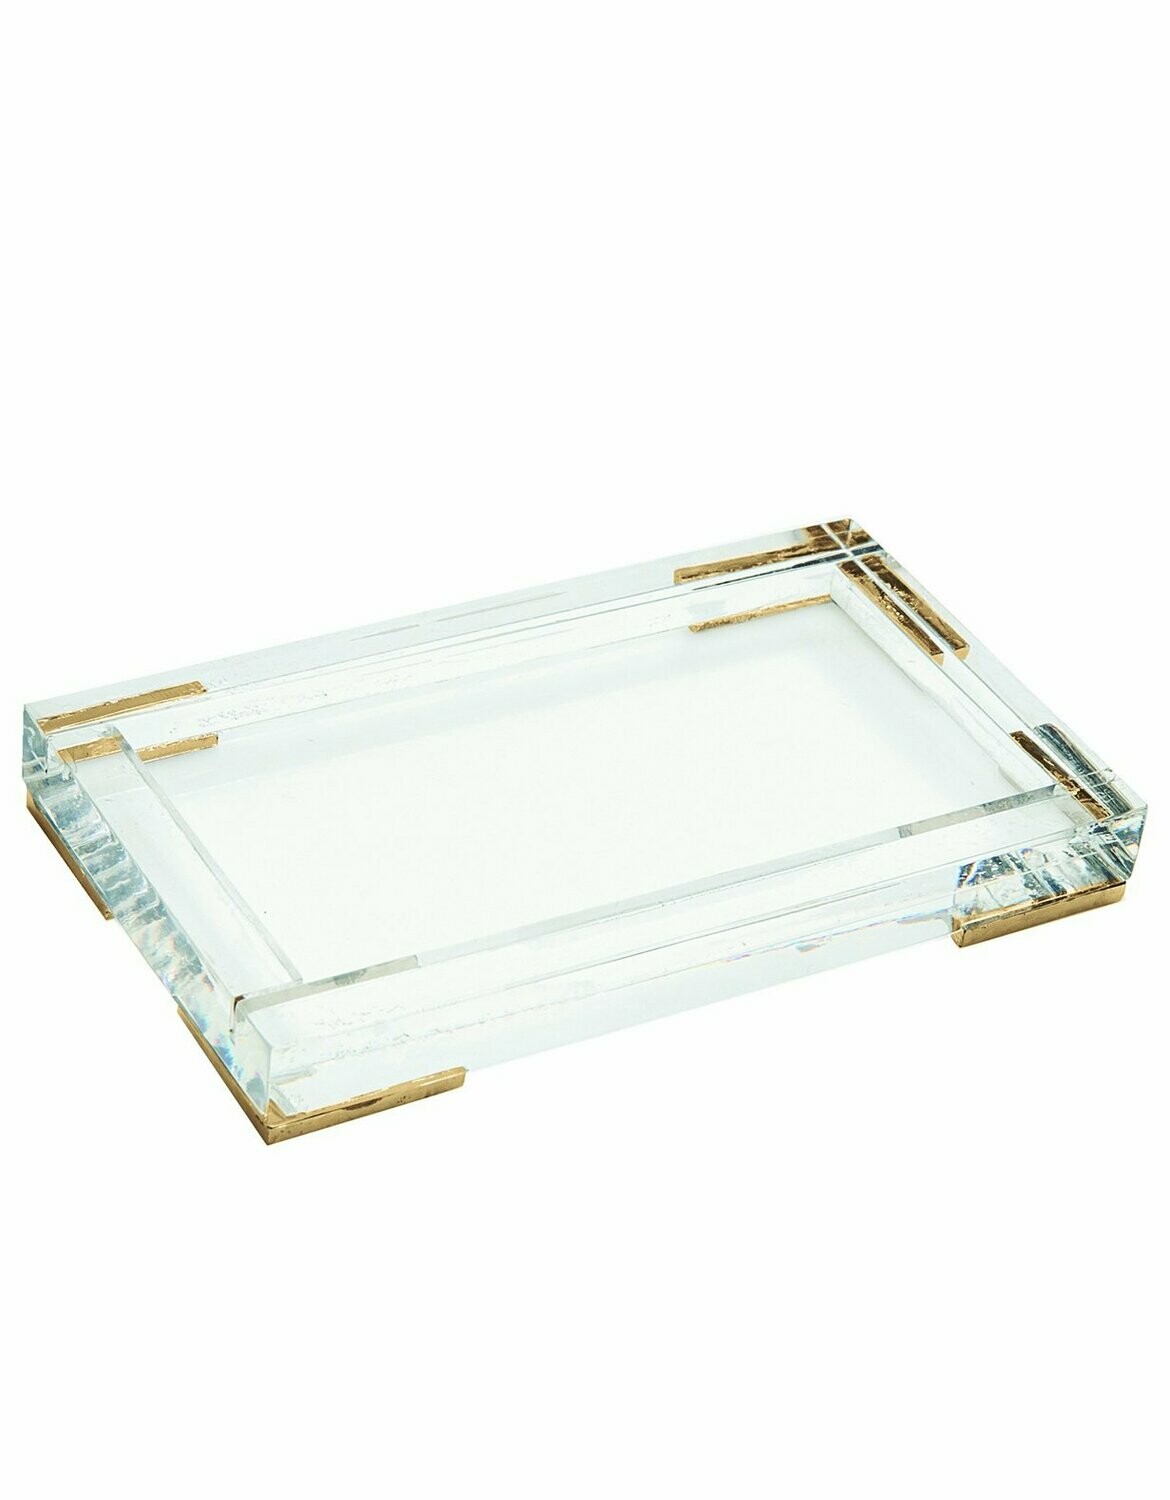 Lucite Tray/Caddy